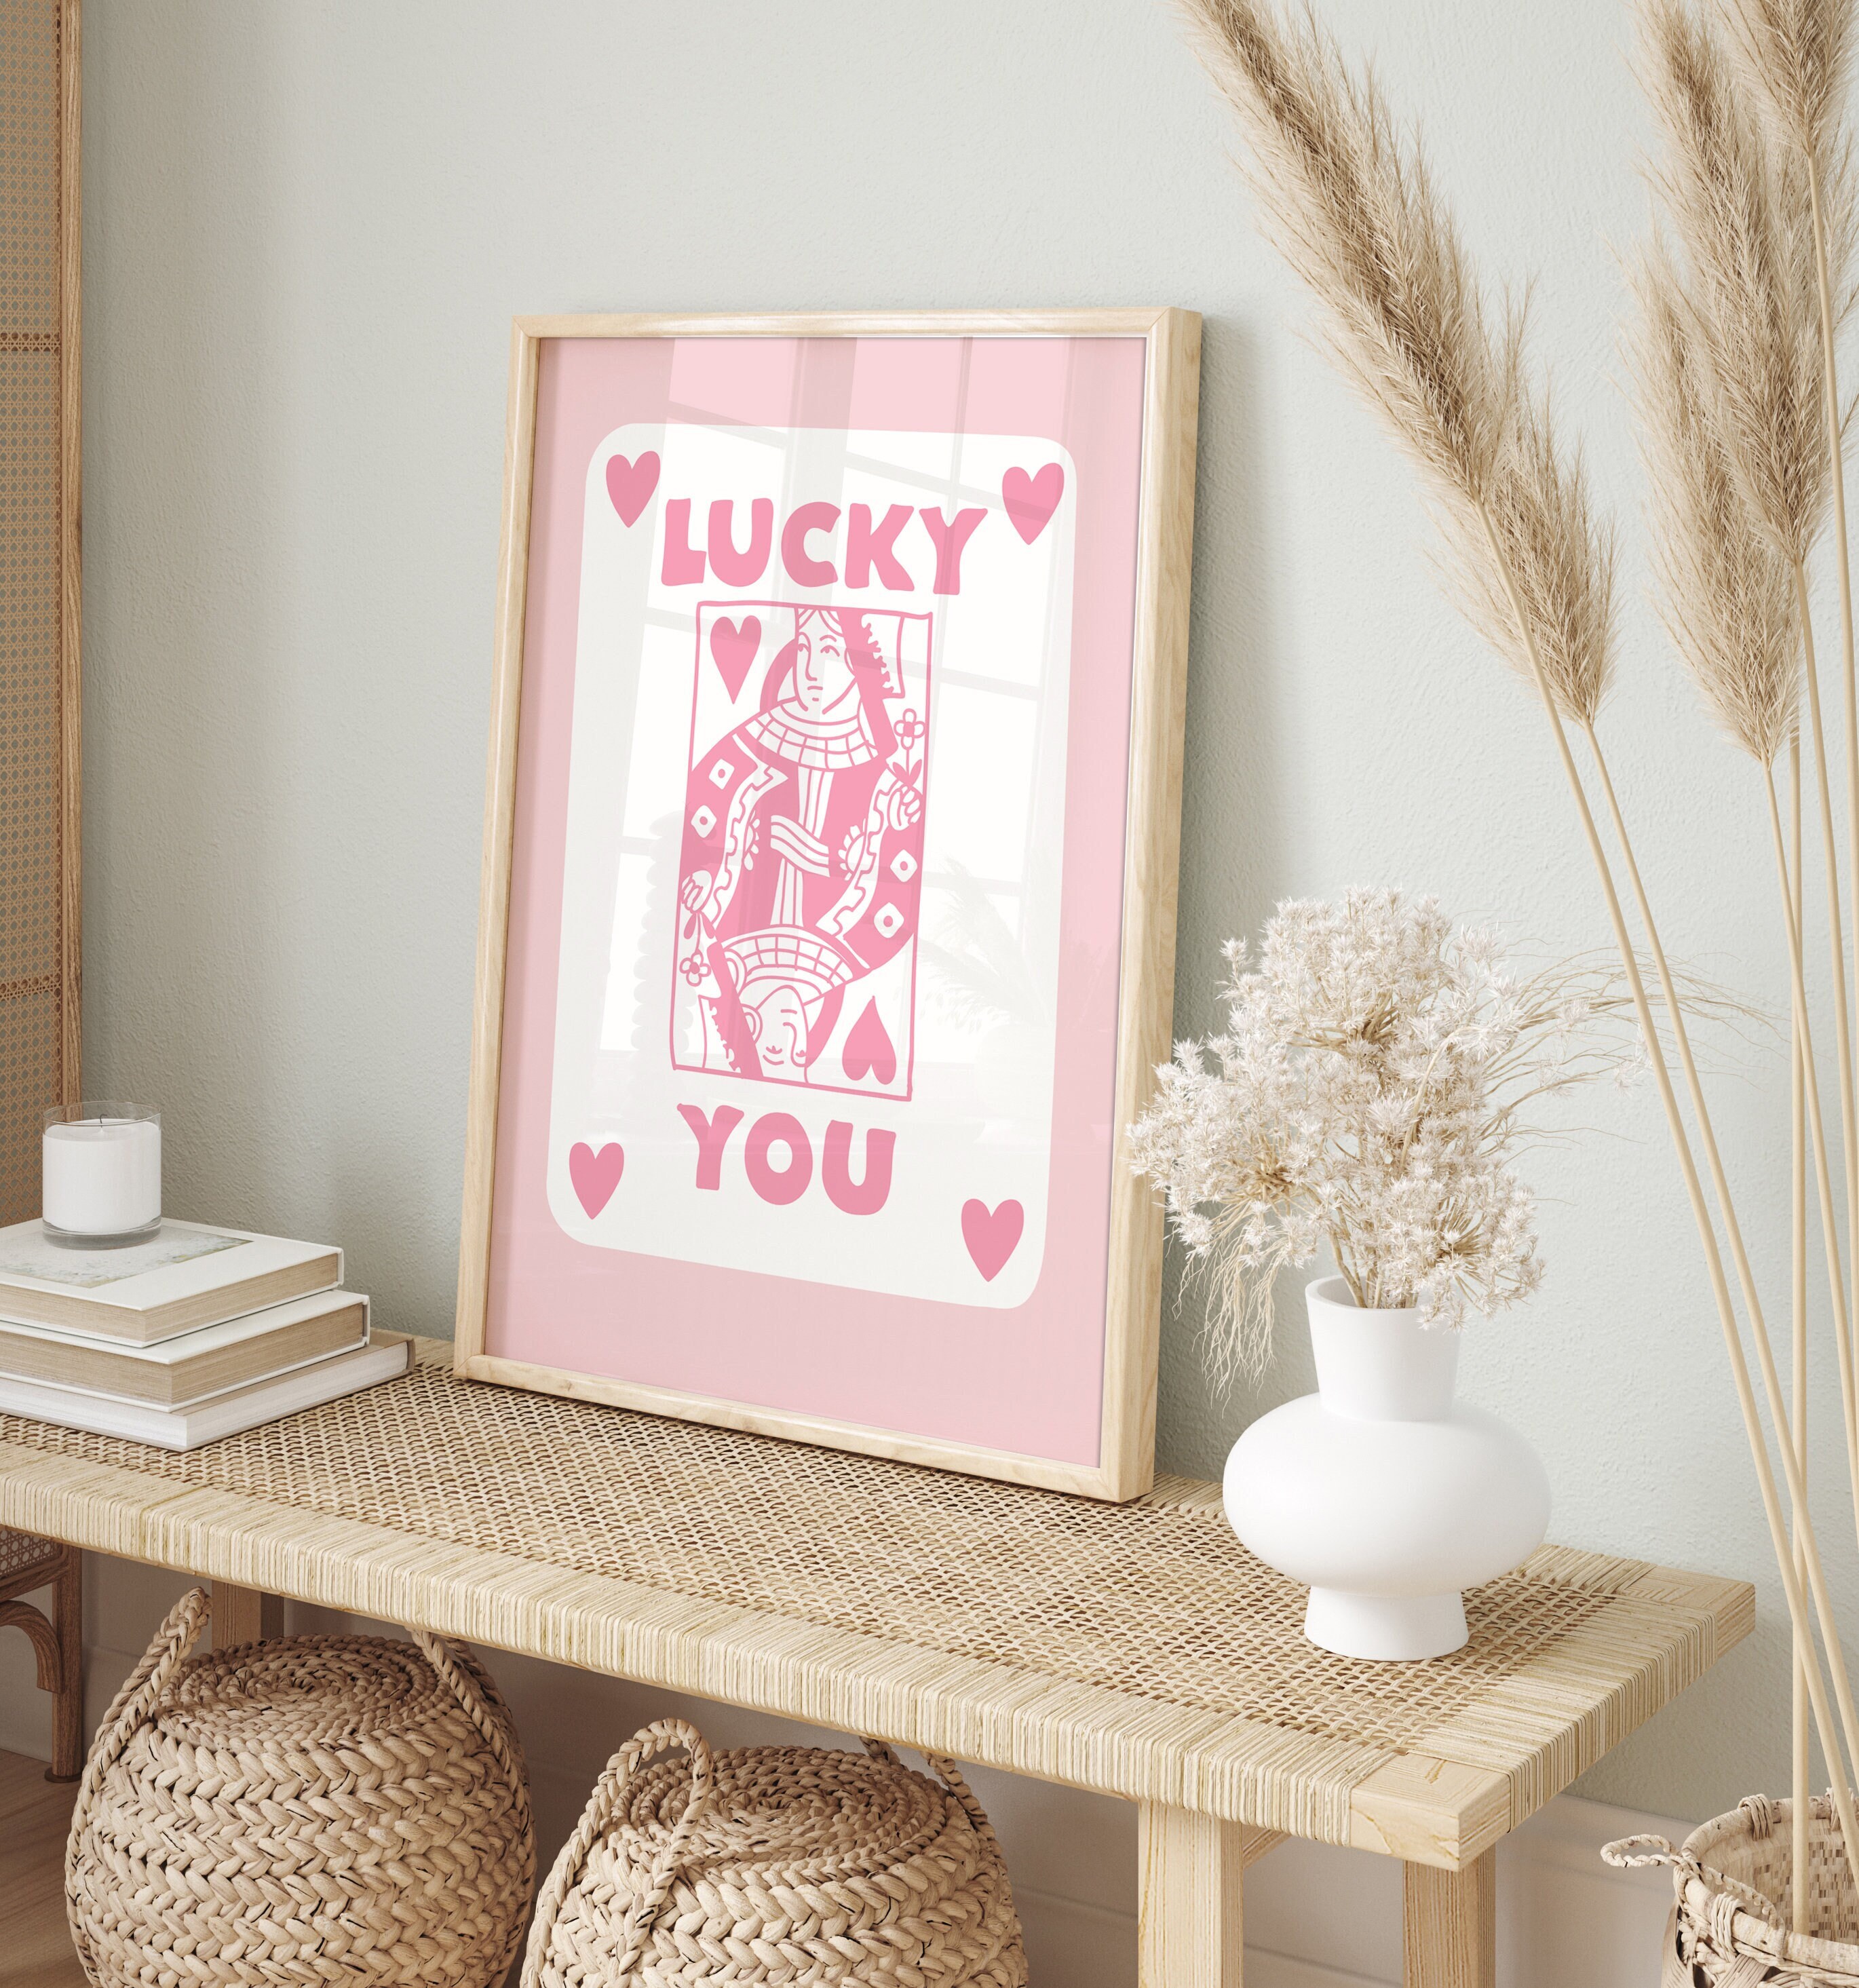 pink layered heart  Canvas Print for Sale by mollsdesignss